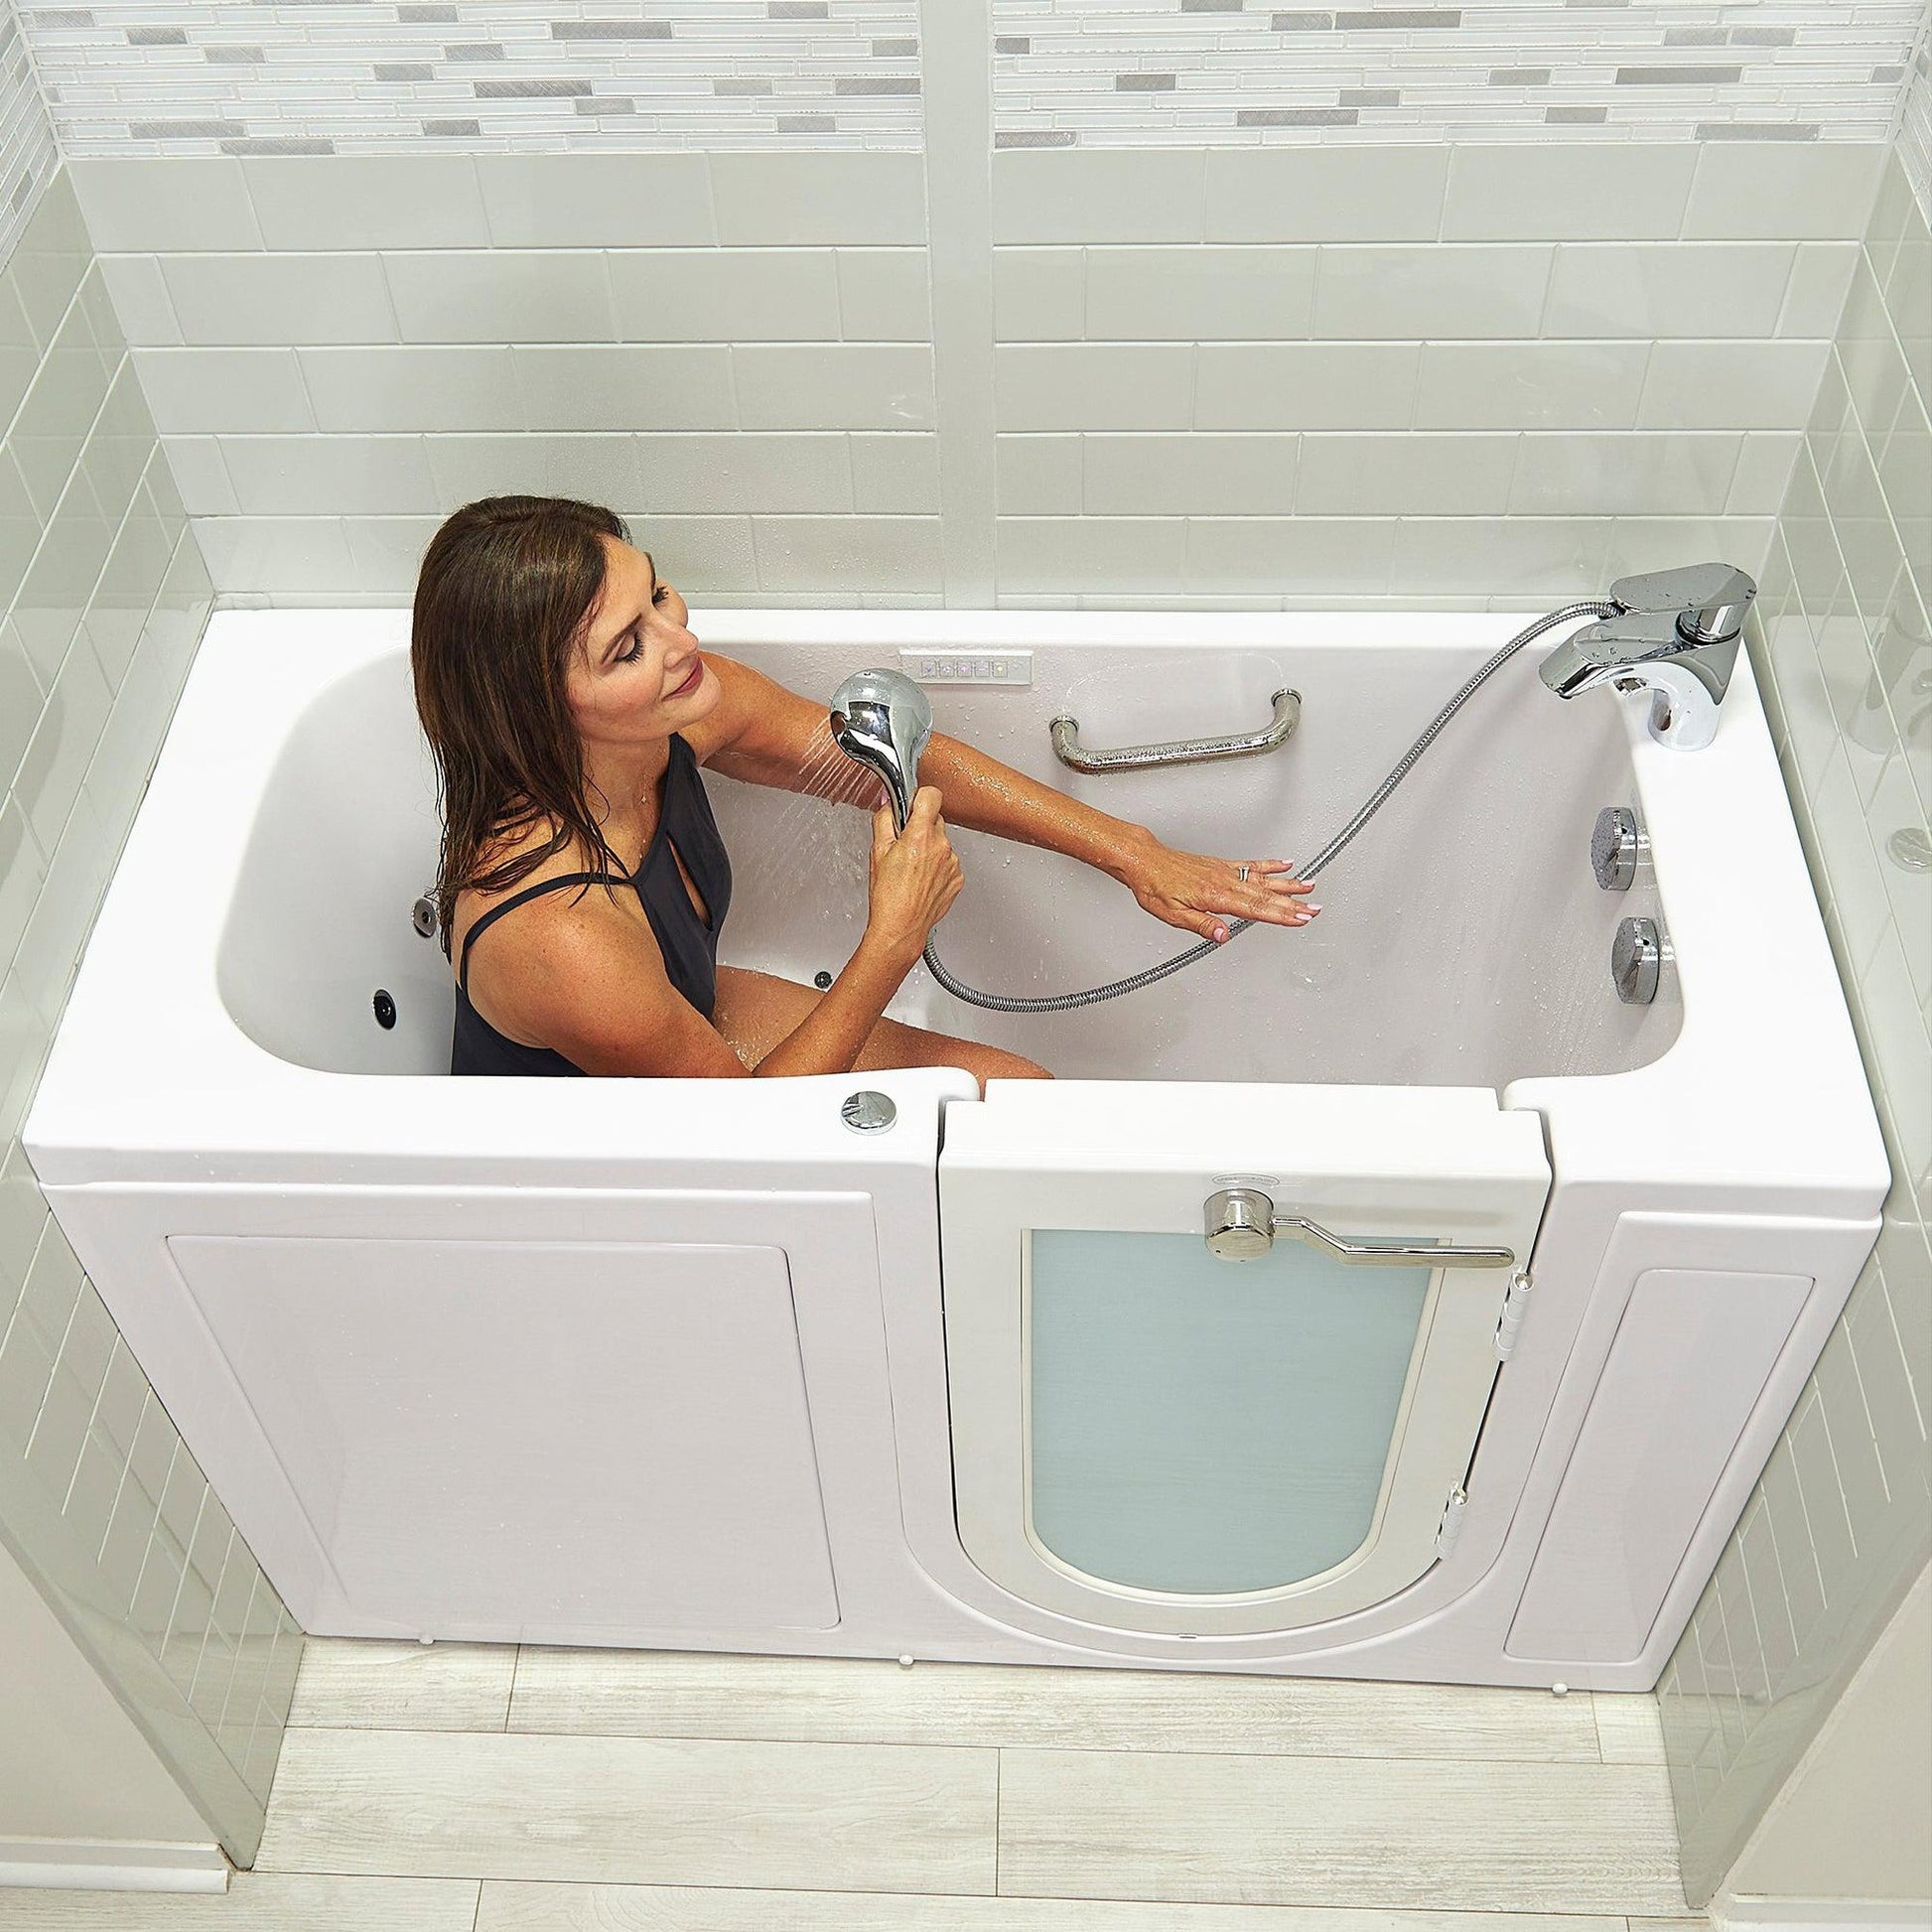 Ella's Bubbles Lounger 27" x 60" White Acrylic Air and Hydro Massage Walk-In Bathtub With 2 Piece Fast Fill Faucet, 2" Dual Drain, Right Outward Swing Door and Digital Controller